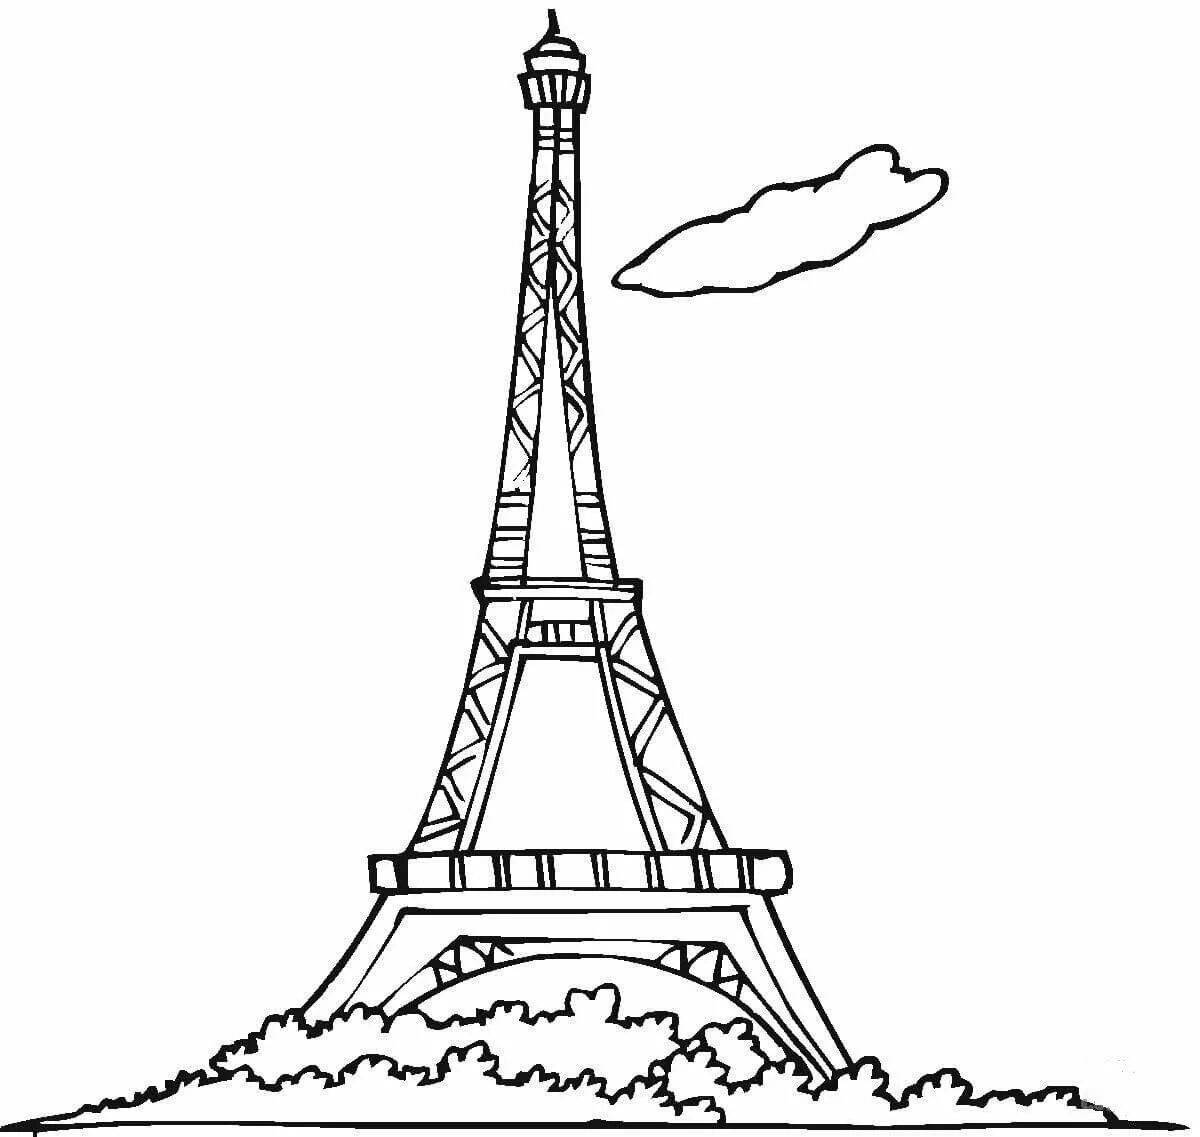 Exquisite eiffel tower coloring book